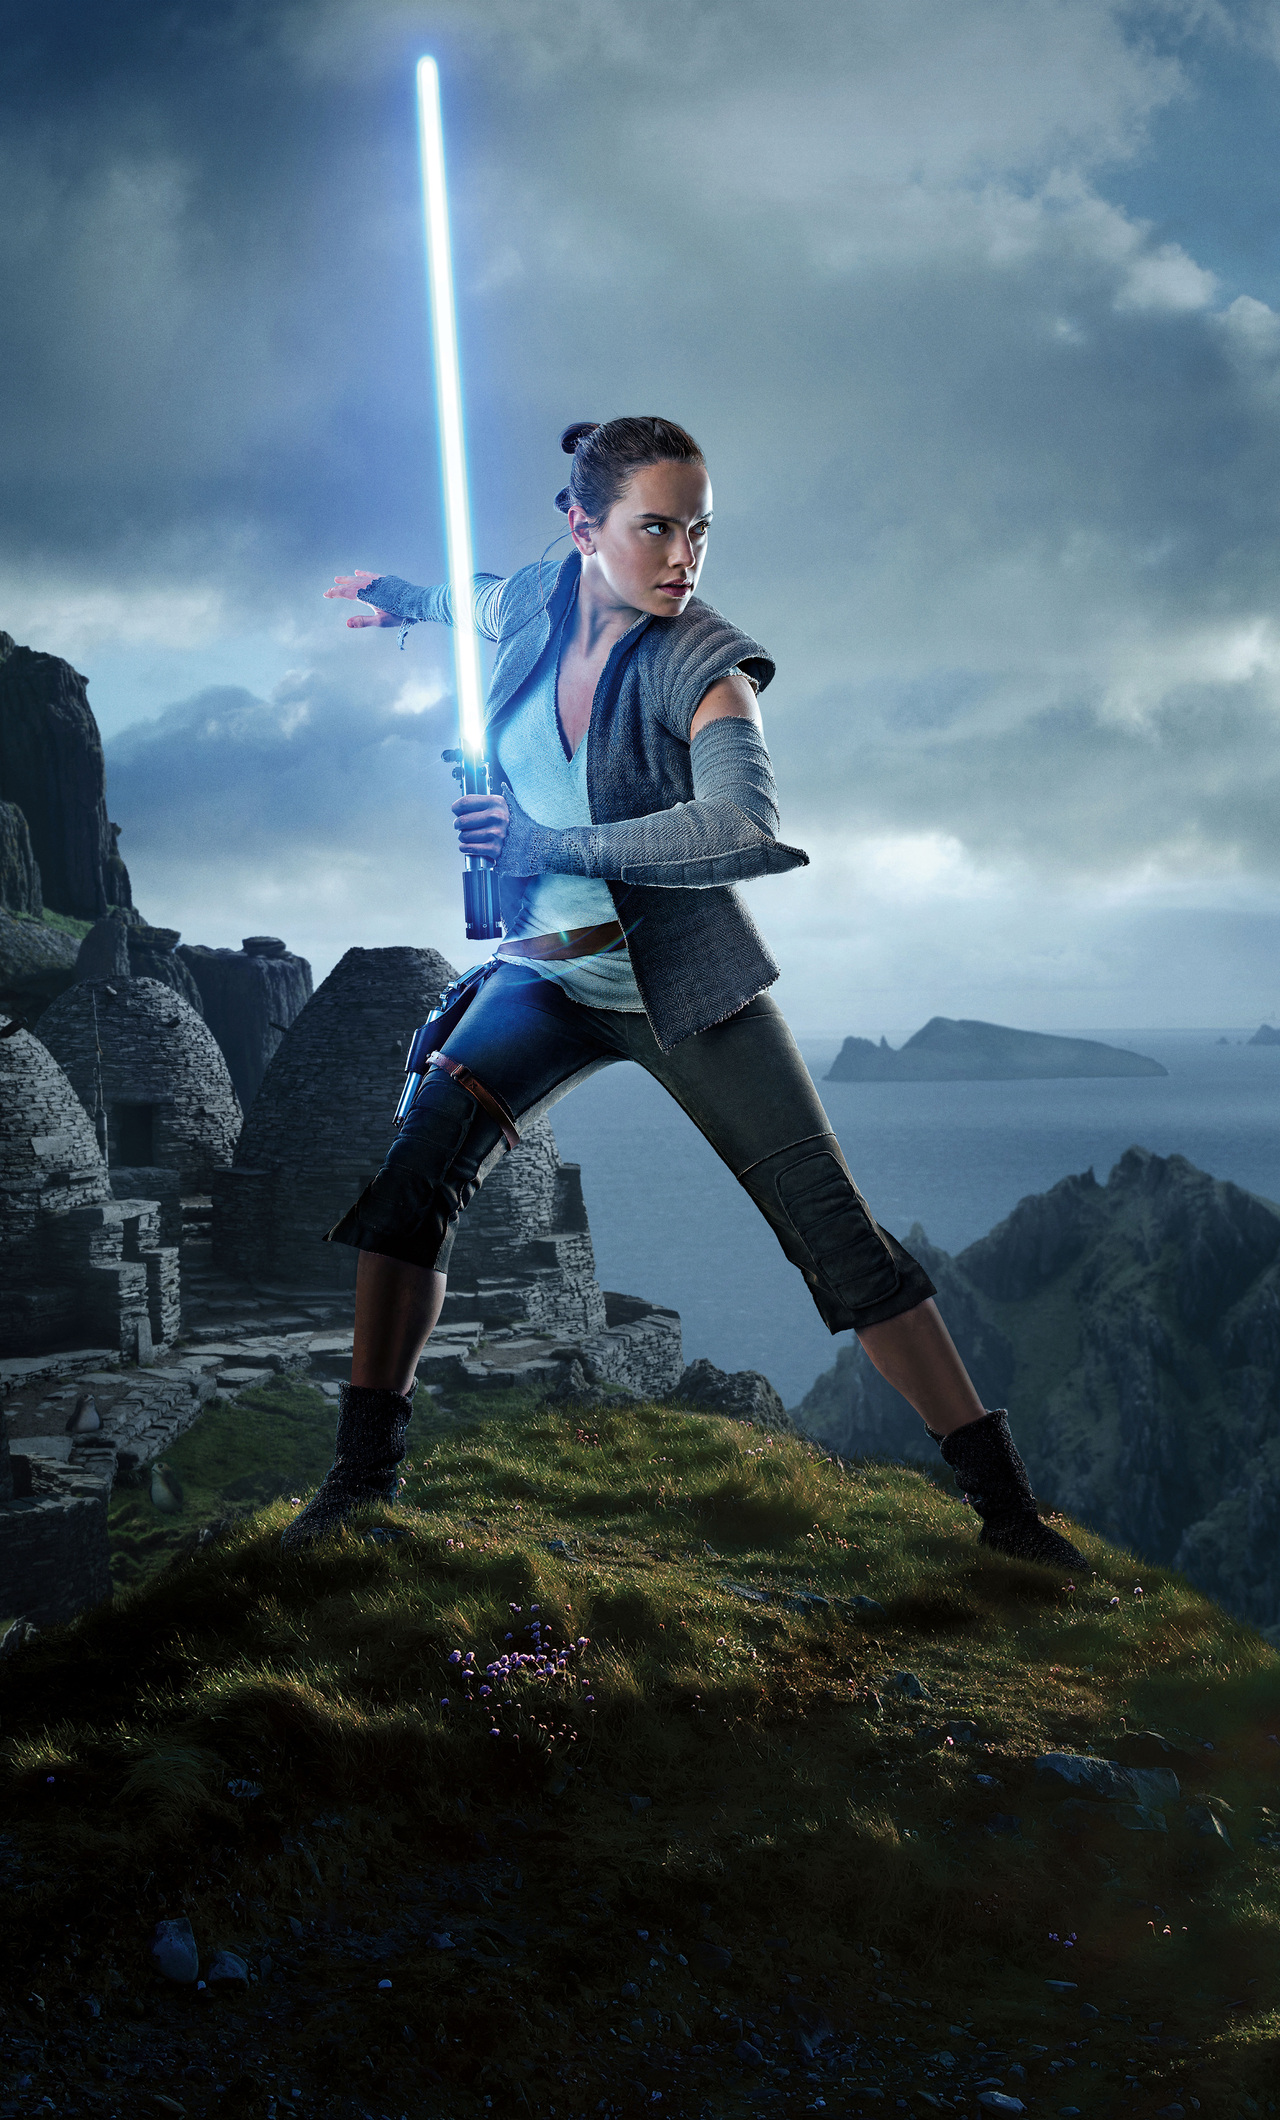 rey star wars wallpaper,adventure,extreme sport,photography,mountain,fictional character